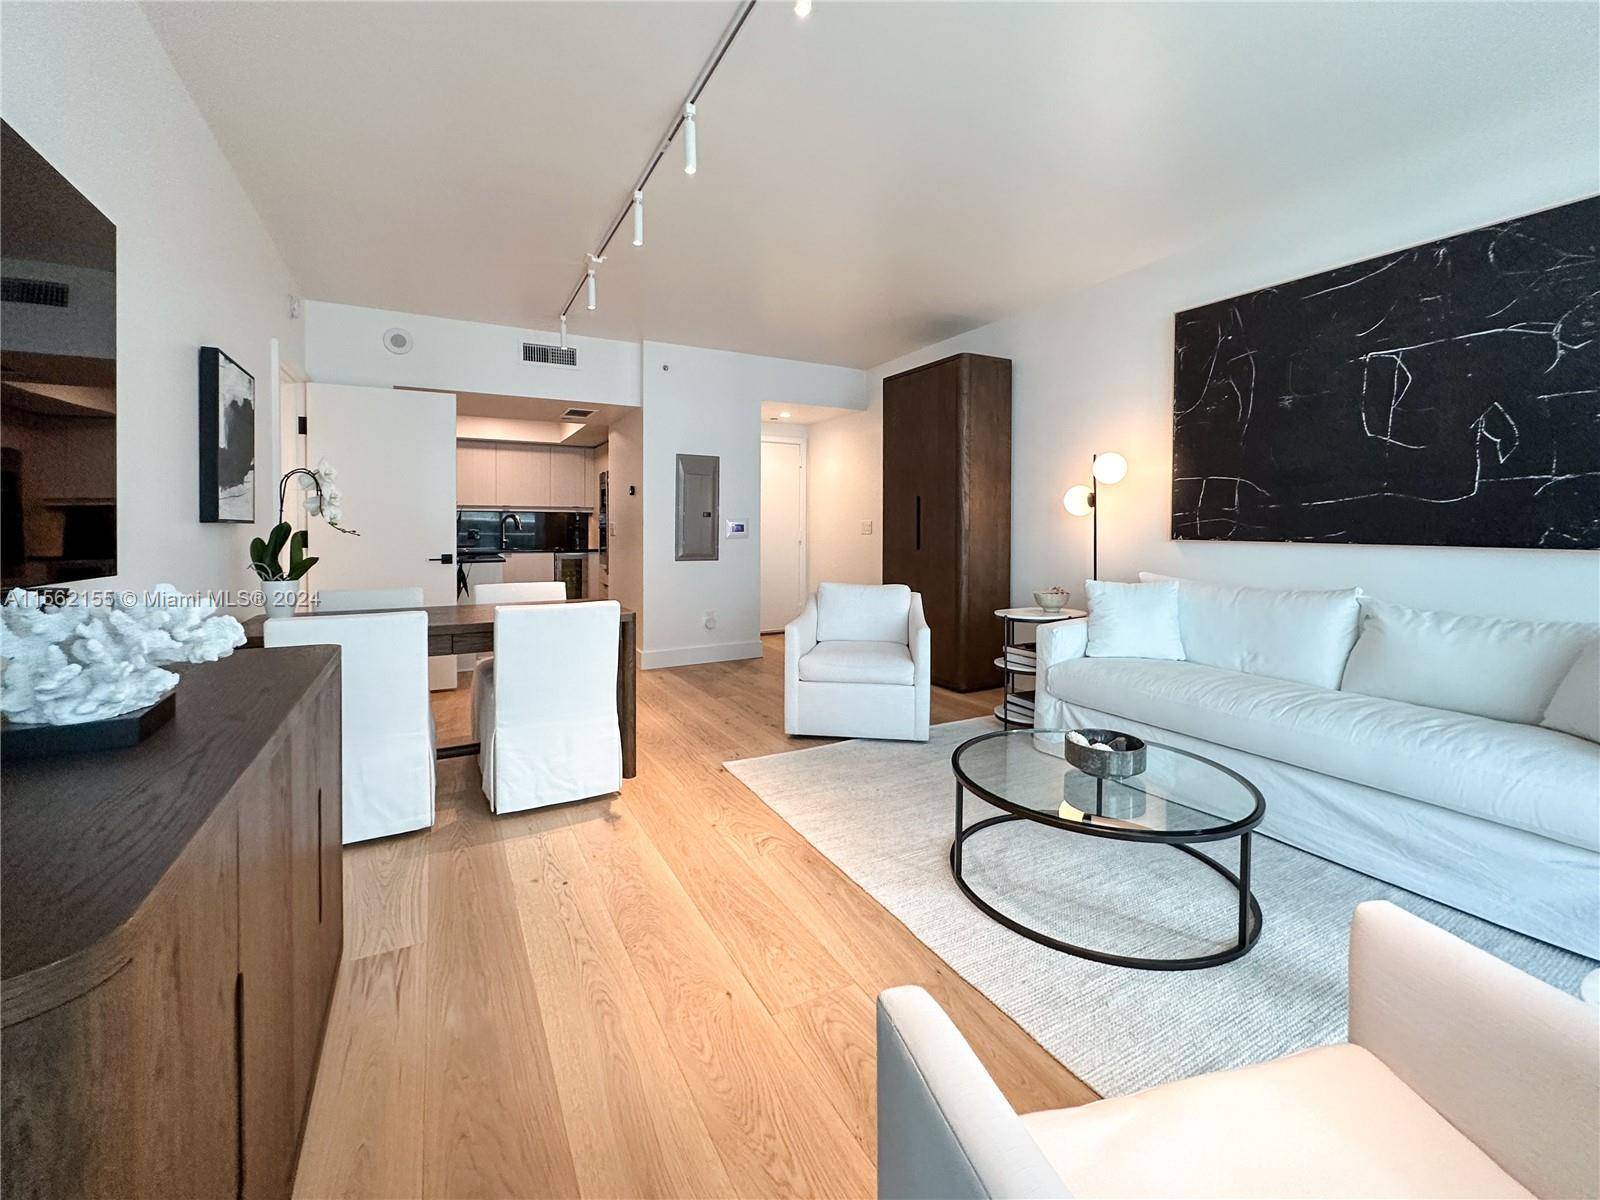 Experience Luxury in This Fully Remodeled, Rare 1 Bed, 1 Bath Unit in Jade at Brickell with Two Parking Spaces.